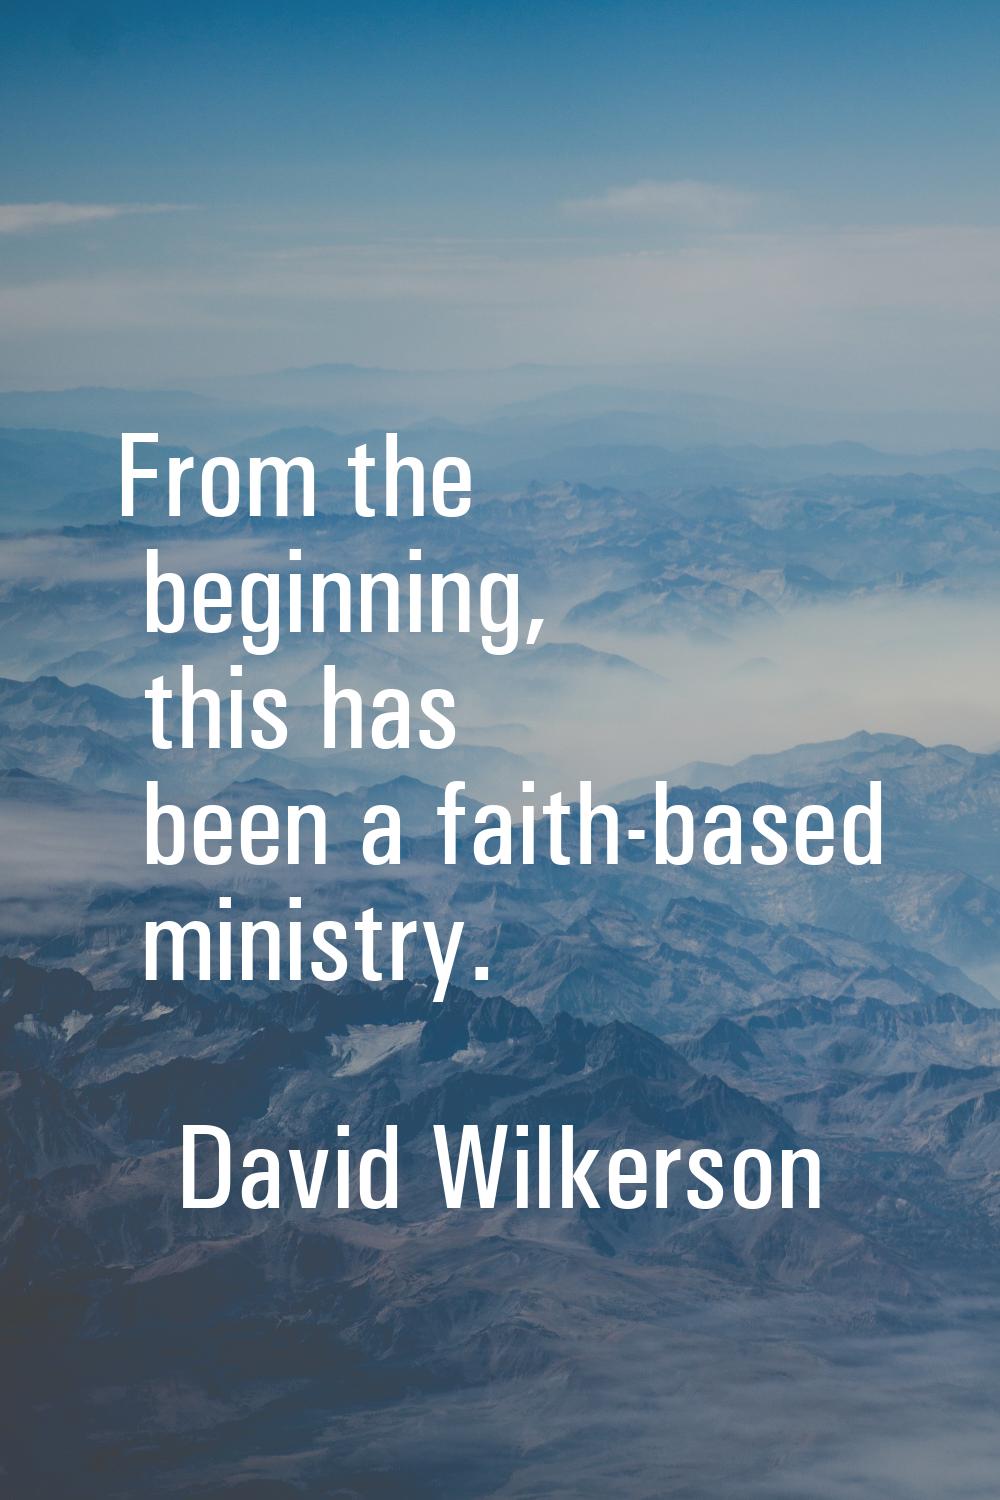 From the beginning, this has been a faith-based ministry.